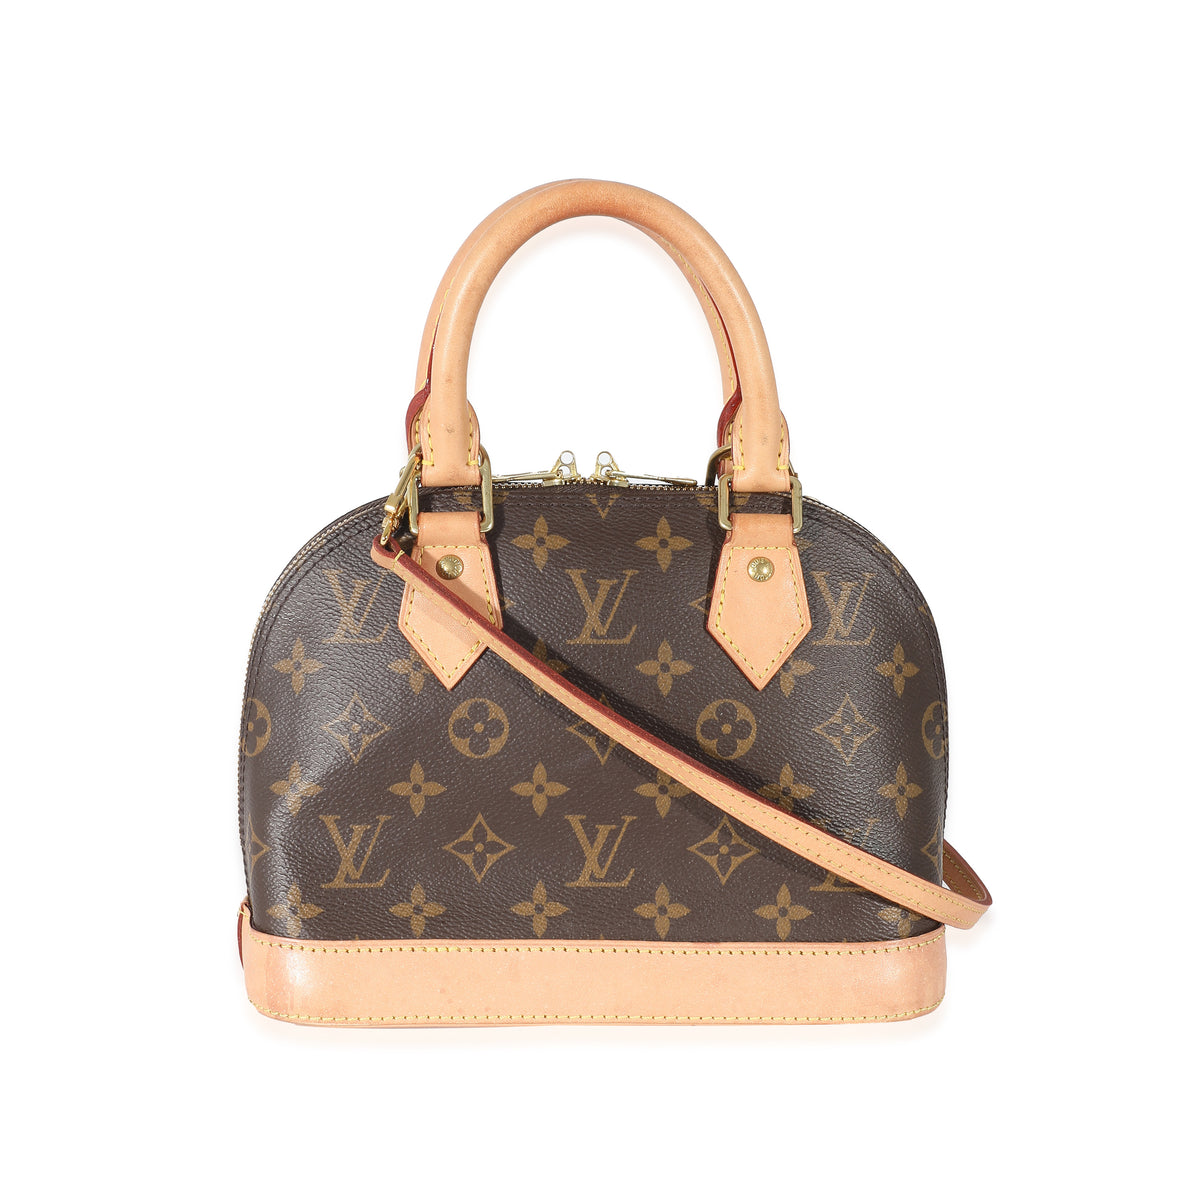 Louis Vuitton - Authenticated Alma Bb Handbag - Leather Brown for Women, Very Good Condition